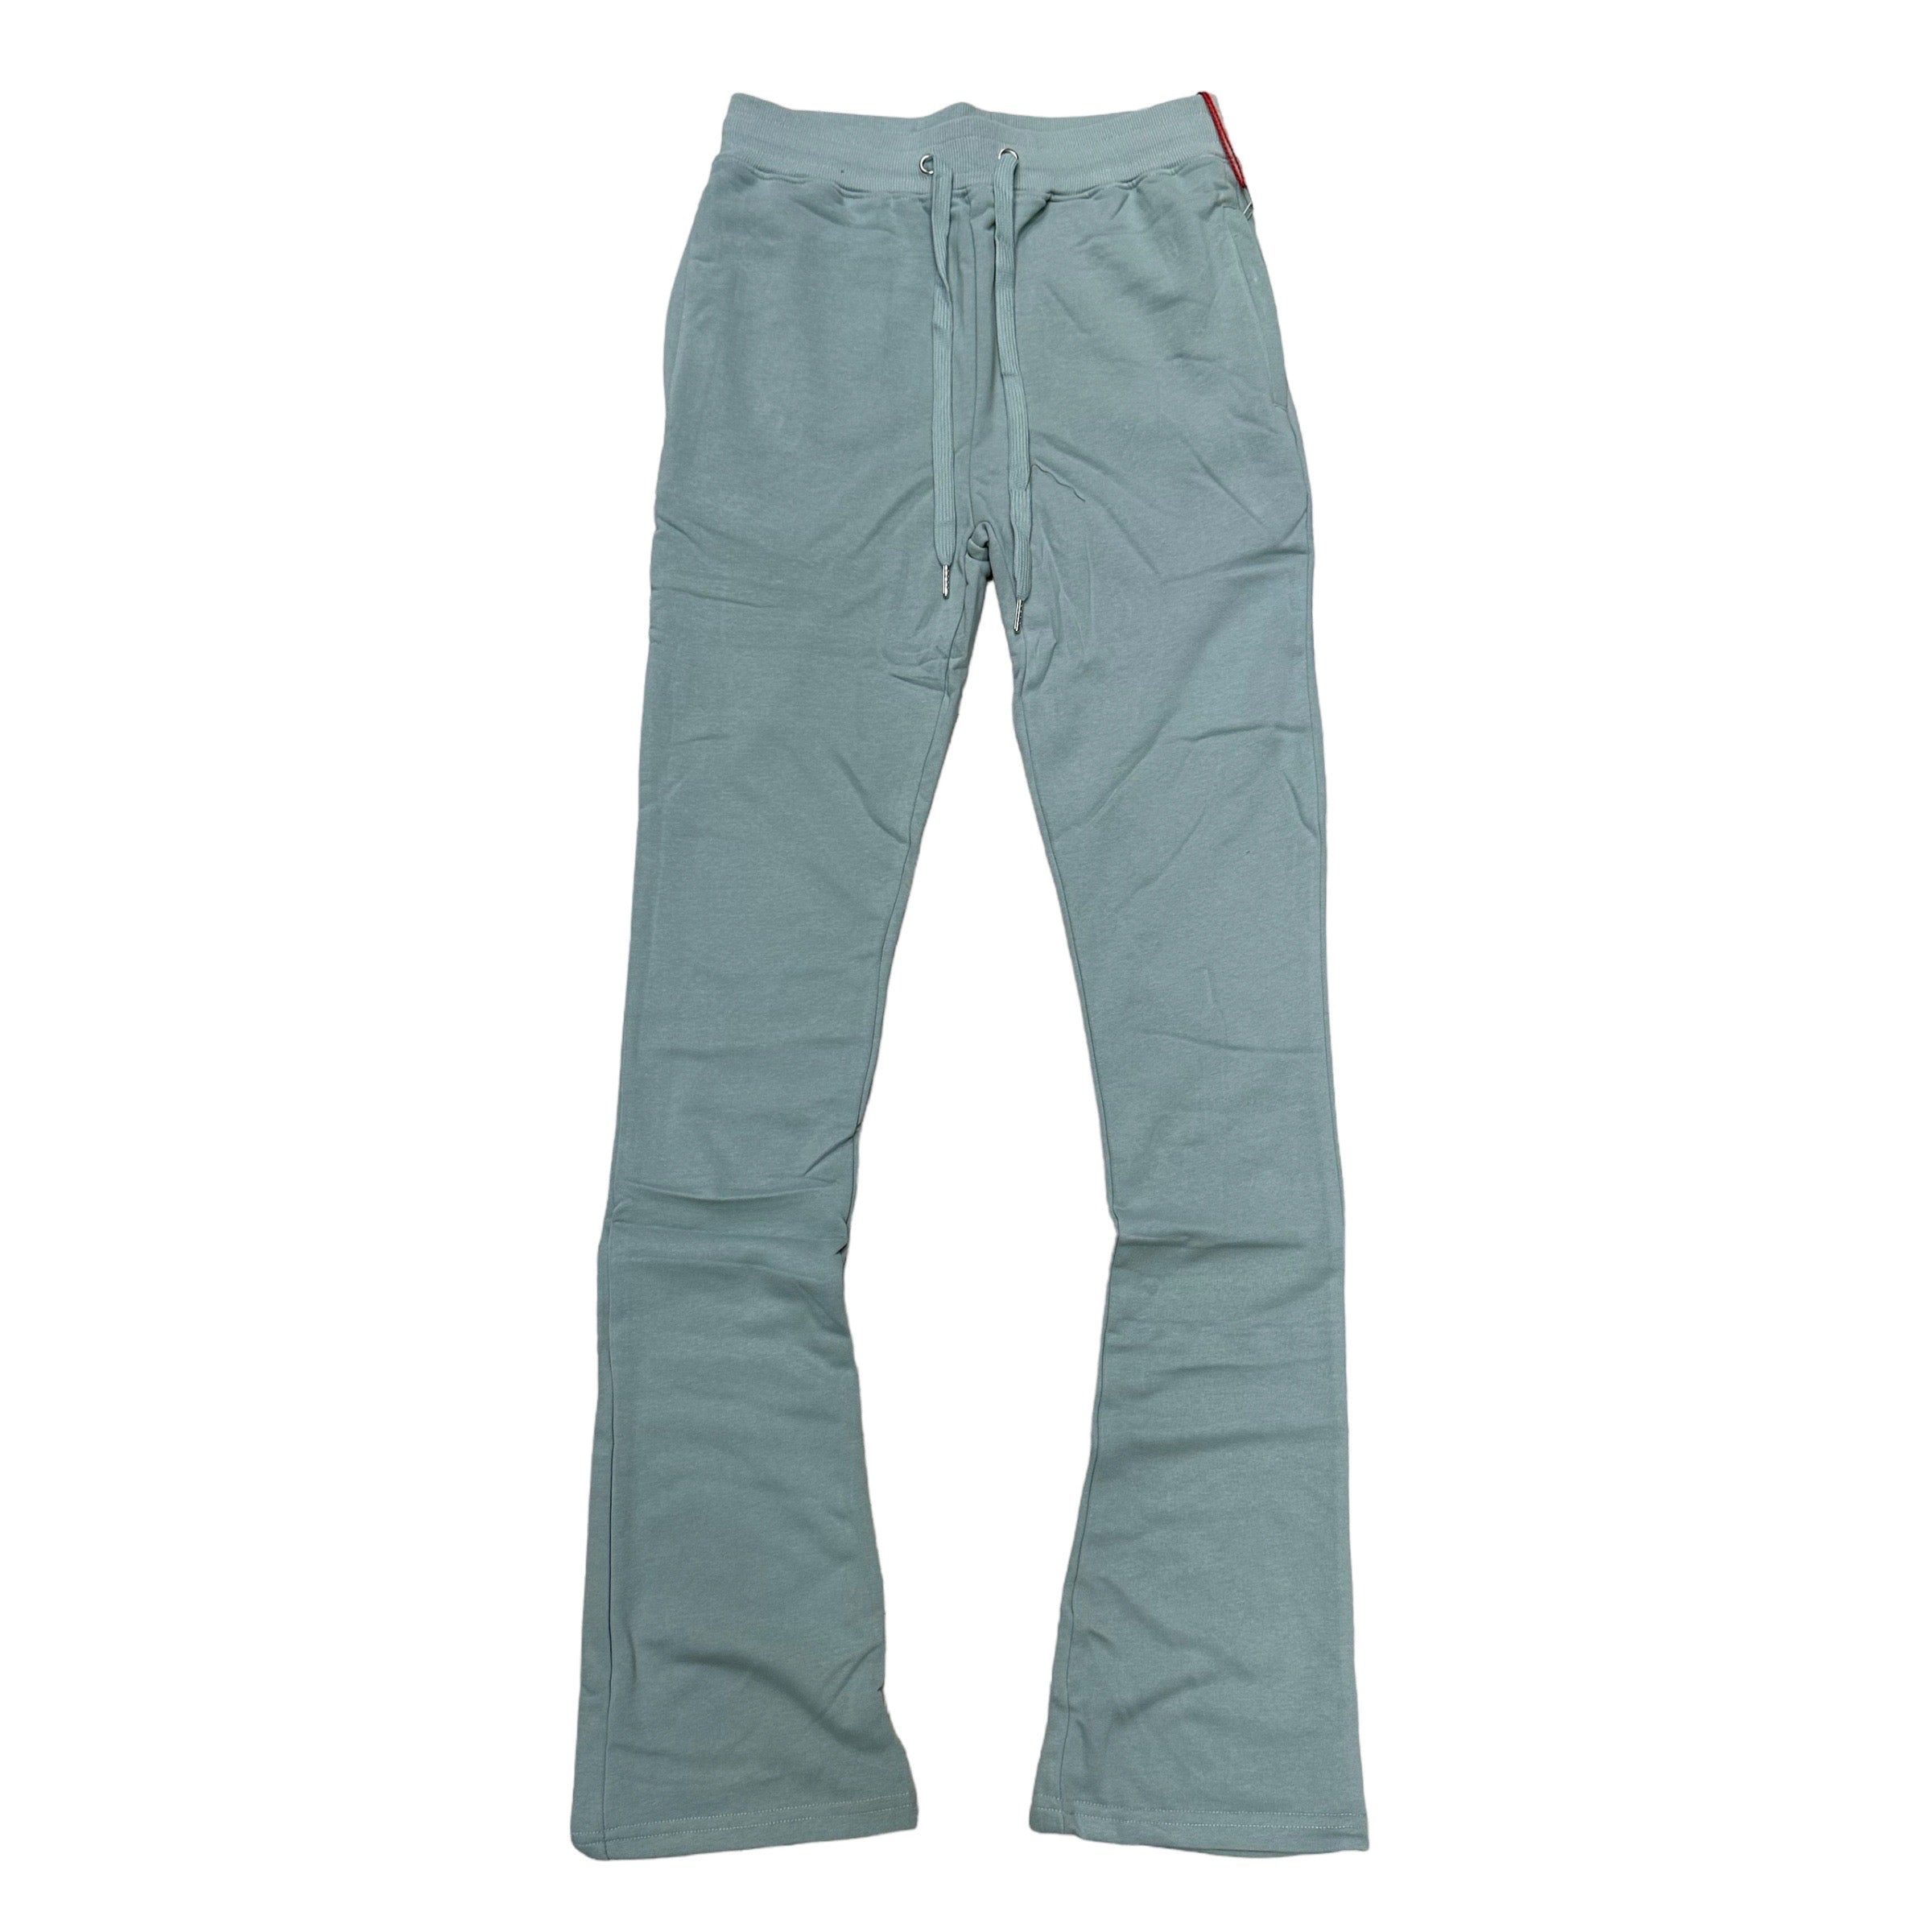 Armor Stacked Sweat Pants Fade Teal